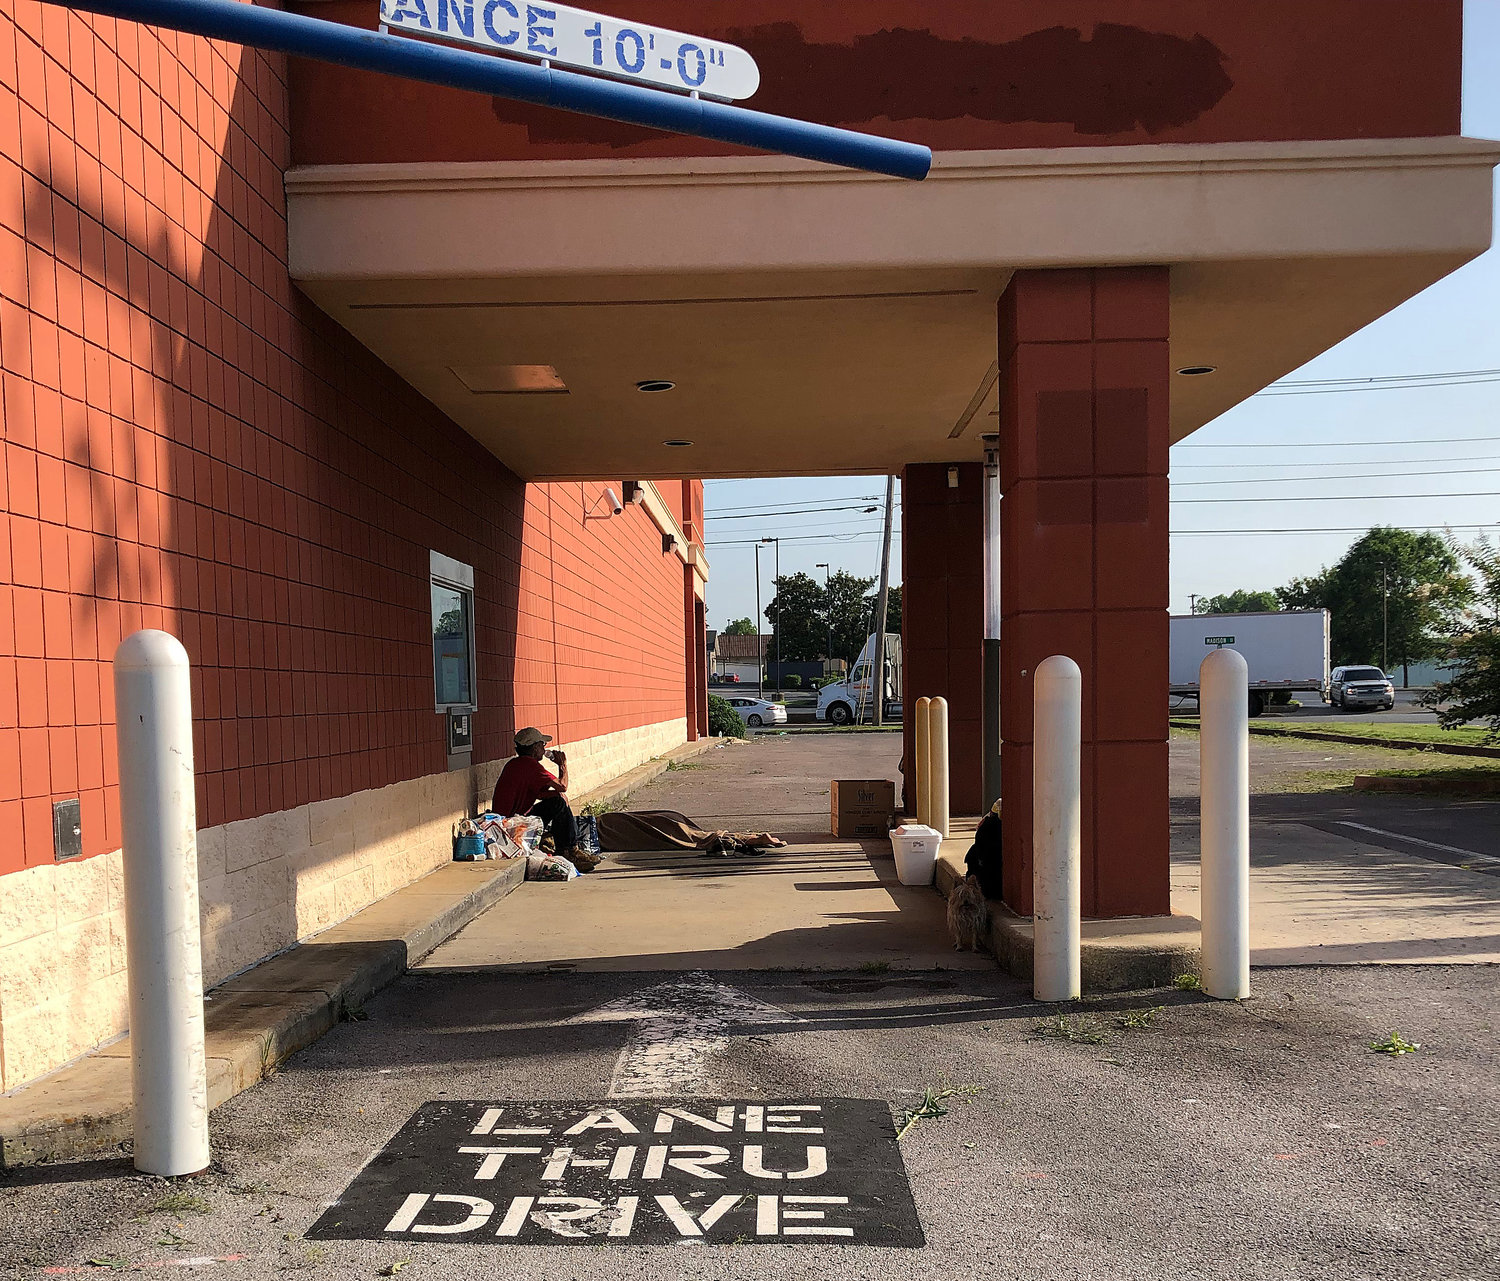 (06/18/22) A couple lived under the drive-thru window at the former Rite Aid drug store on Madison Street for several days. The man takes a drink of water while his wife sleeps under a blanket. She described herself as a former Tyson Foods employee about to be rehired, and said once she’s back to work they’ll be able to afford housing. The couple asked not to be identified.